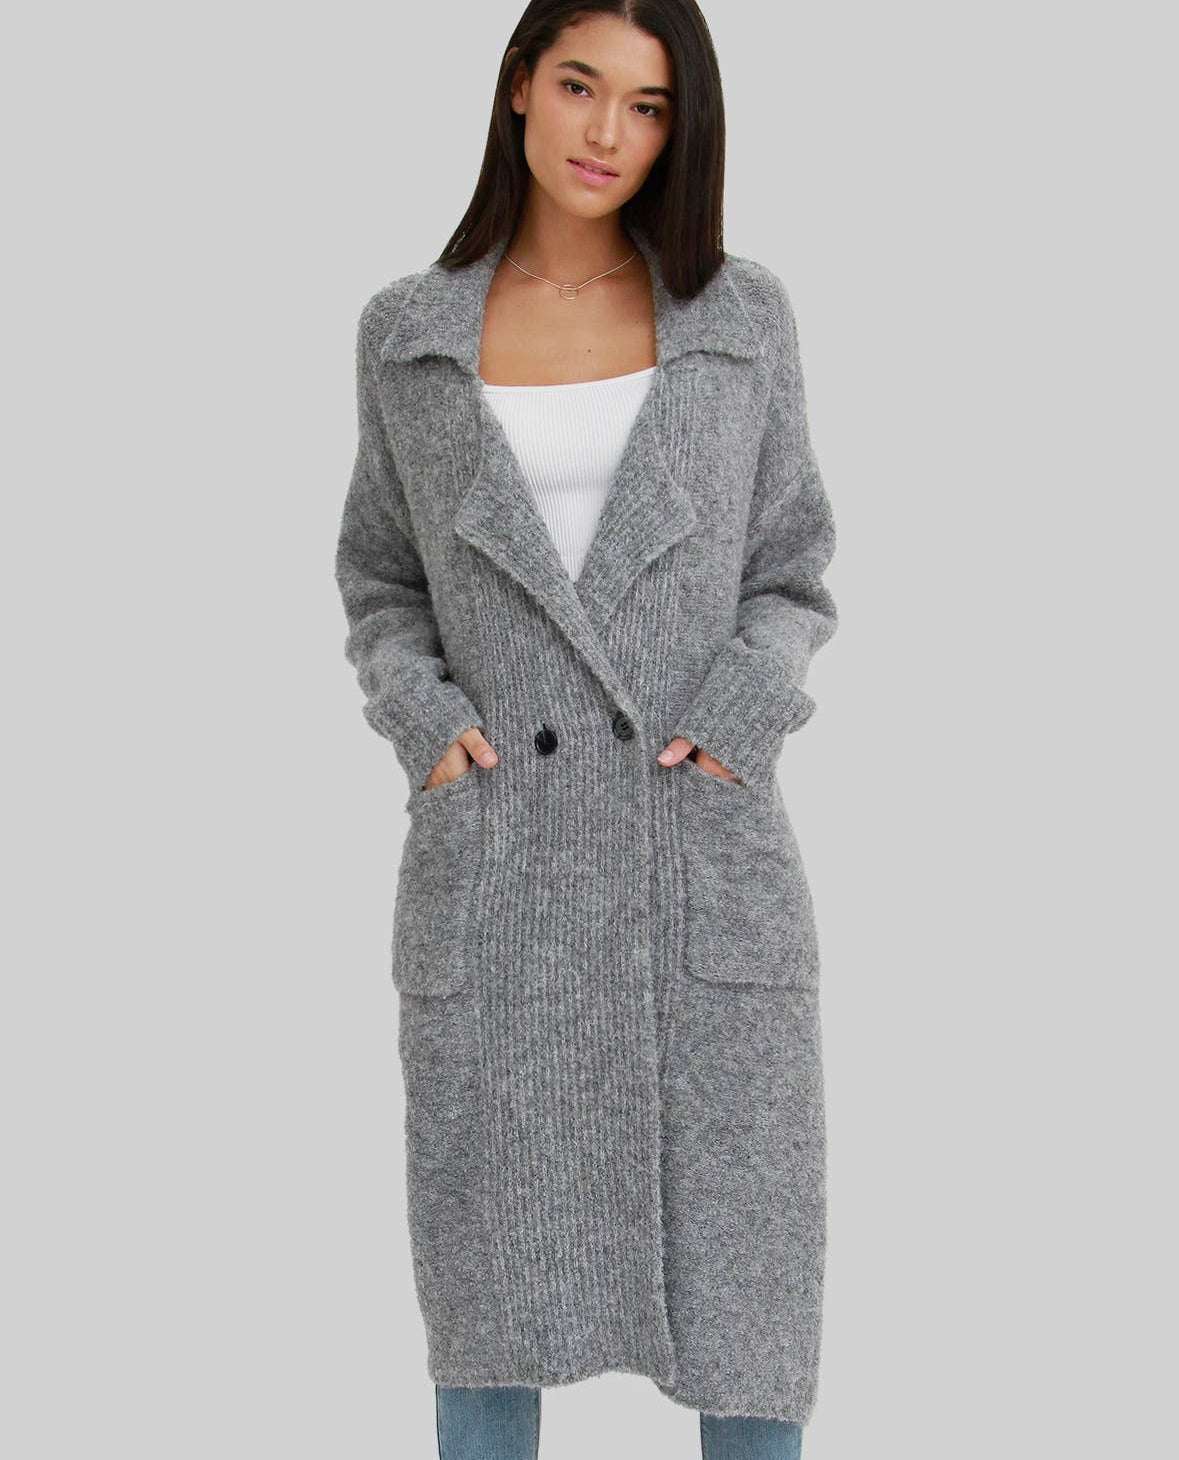 Cozy full-length coat, complete with convenient front pockets